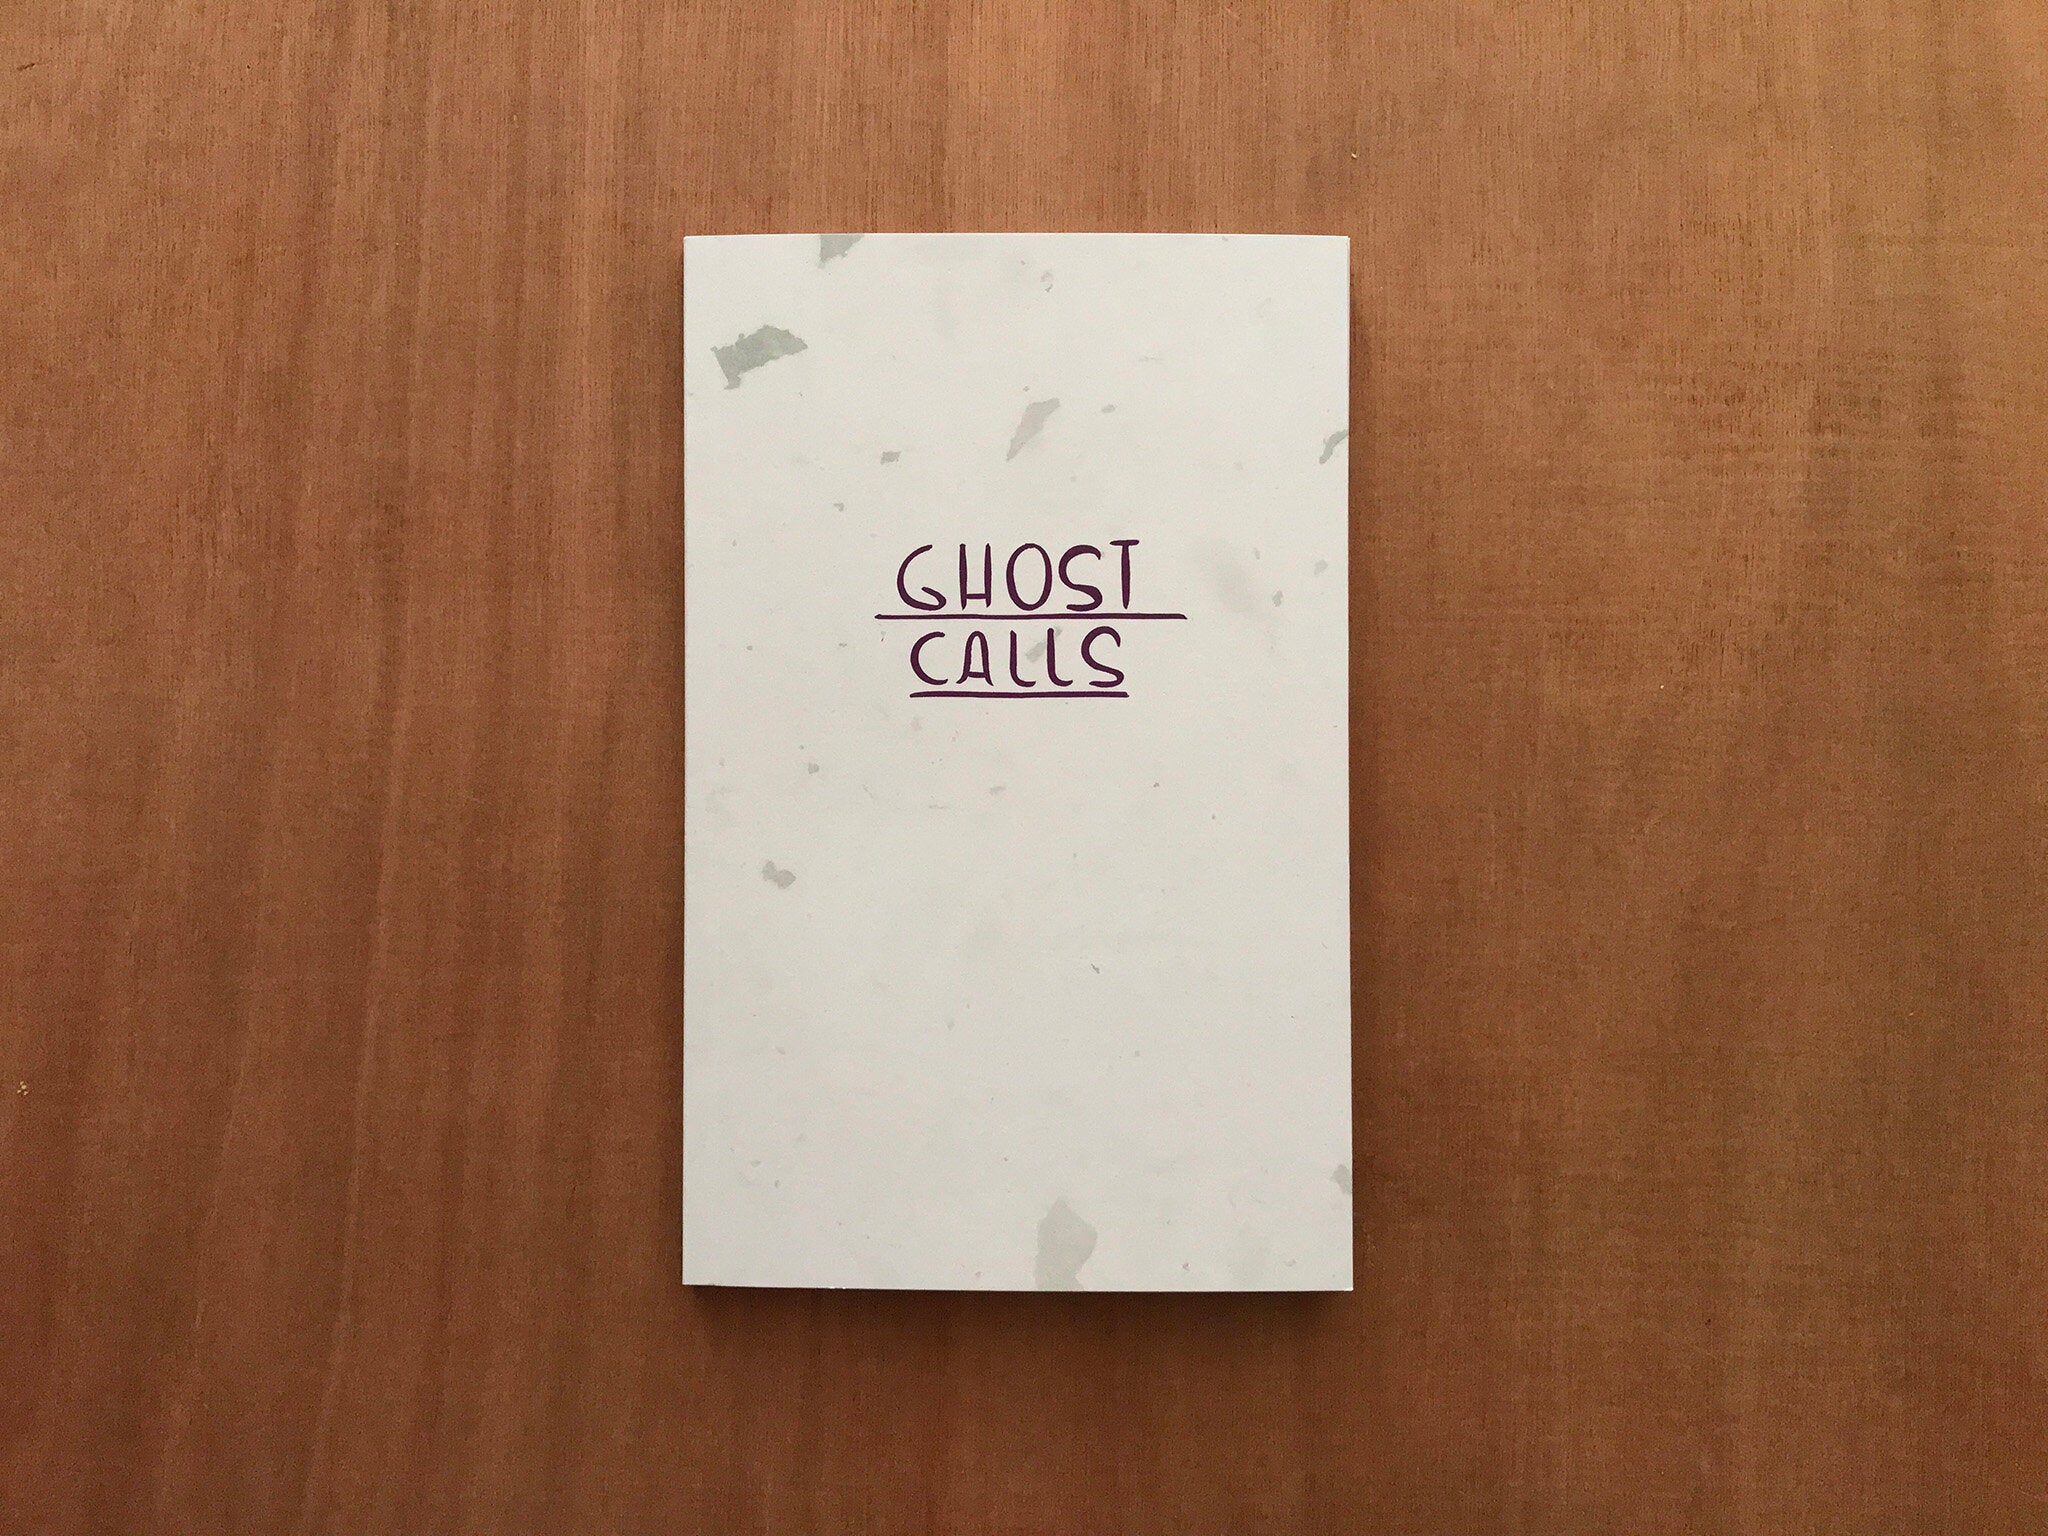 GHOST CALLS by Emma Talbot